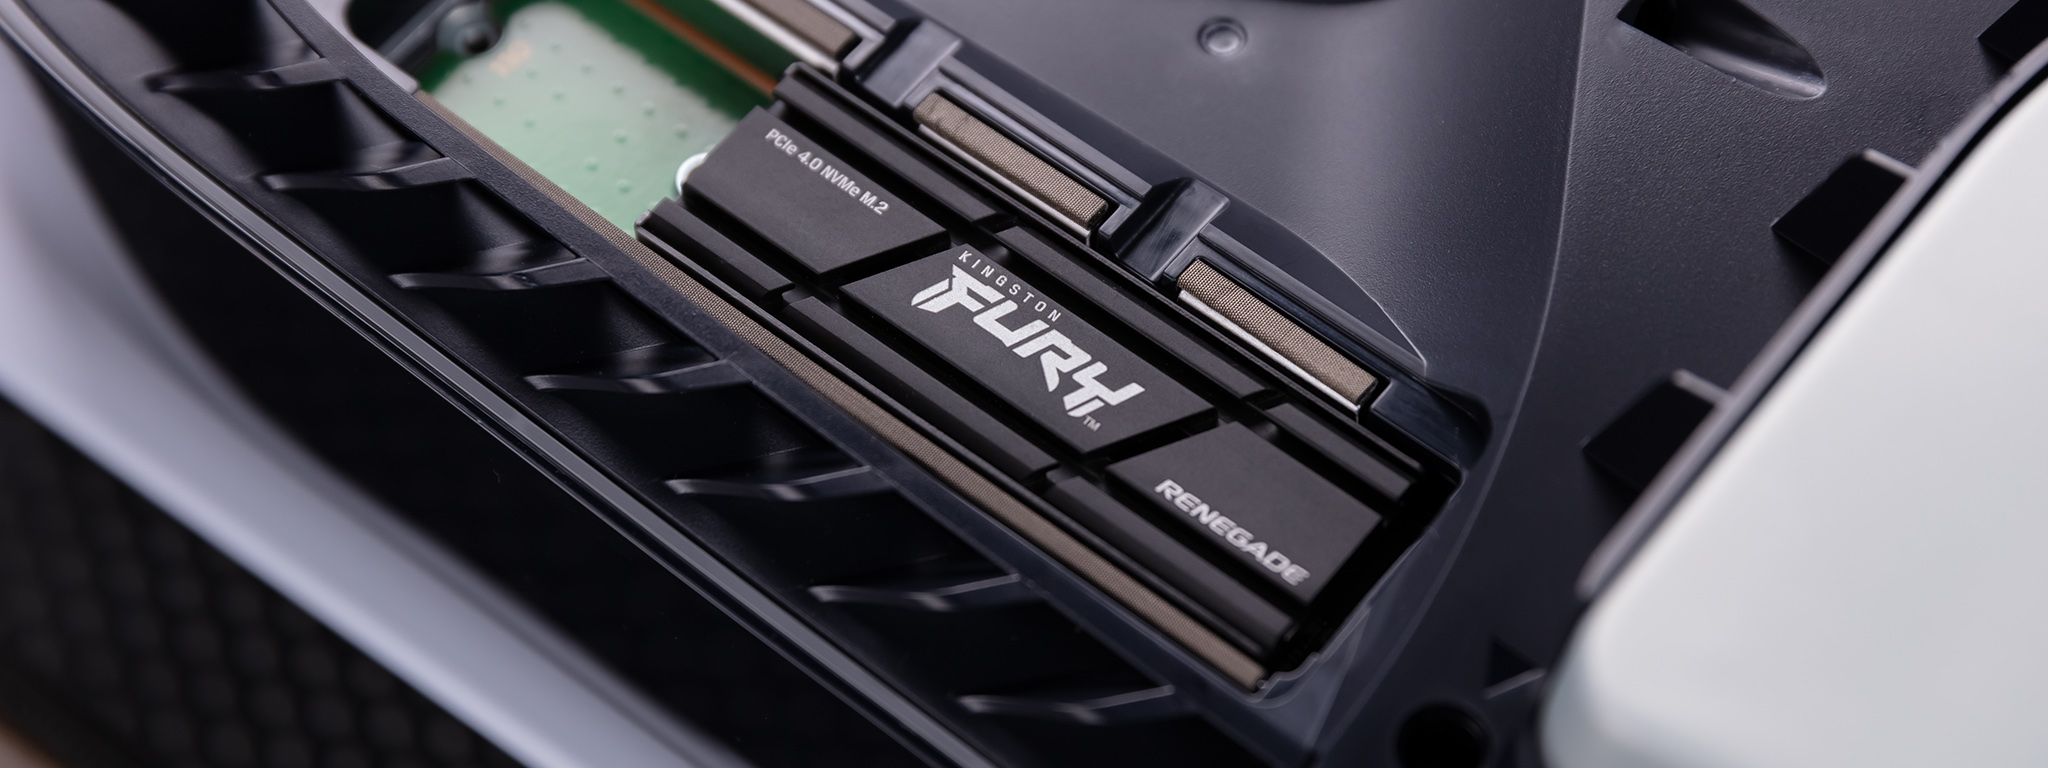 Kingston FURY Renegade SSD with heatsink installed in a PlayStation 5 gaming console